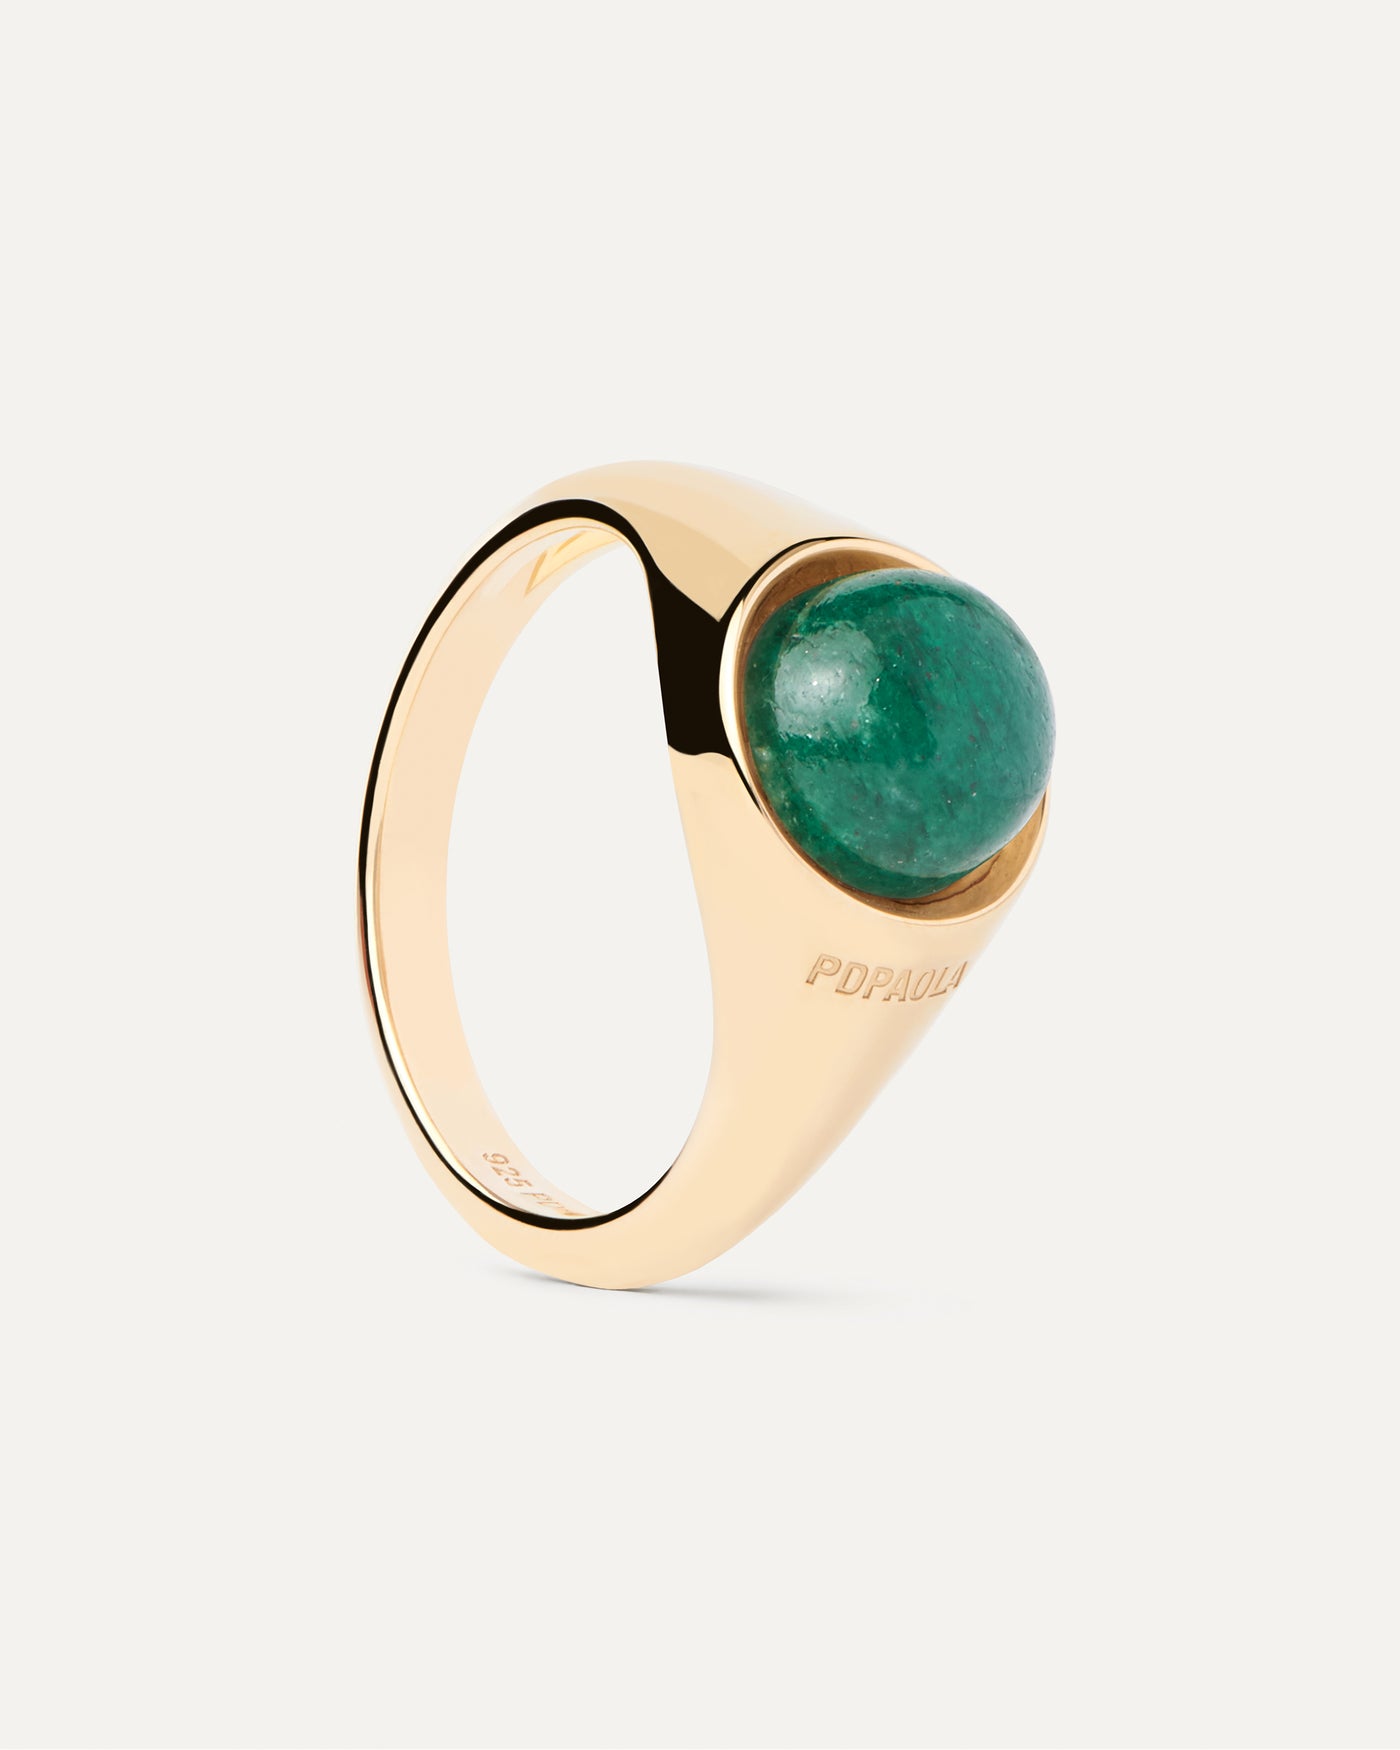 2023 Selection | Green Aventurine Moon Ring. Get the latest arrival from PDPAOLA. Place your order safely and get this Best Seller. Free Shipping.